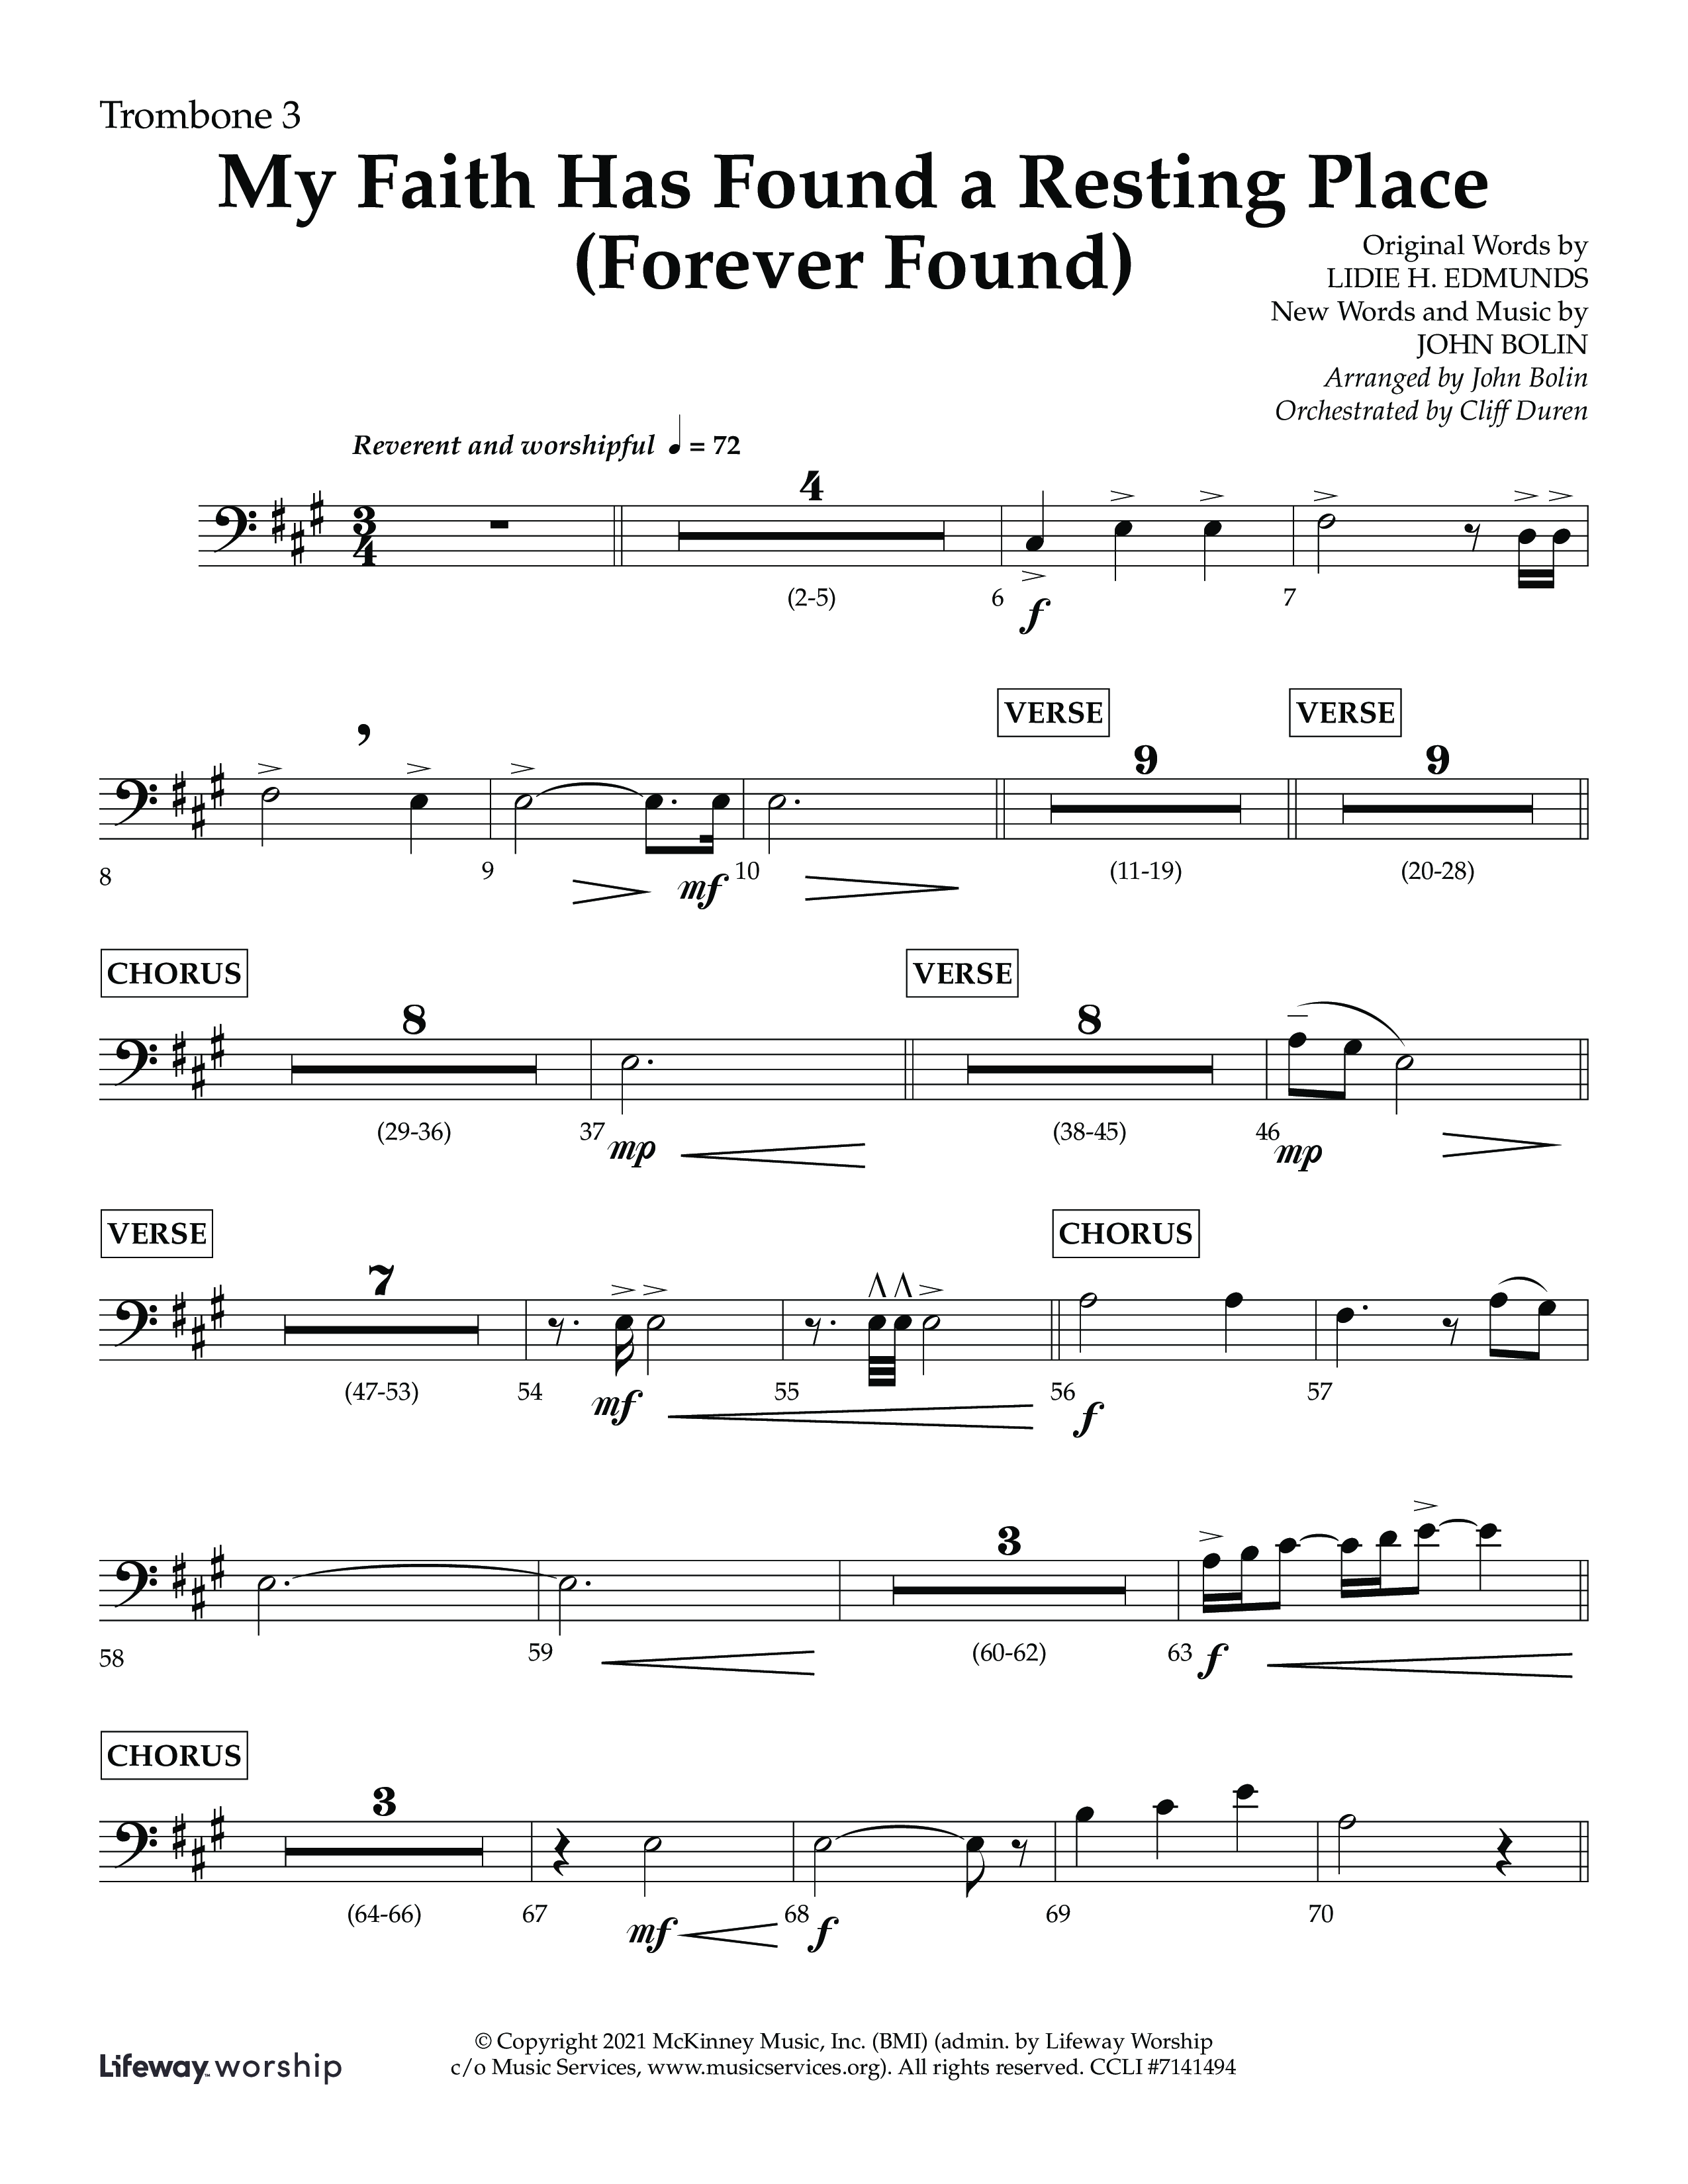 My Faith Has Found a Resting Place (Forever Found) (Choral Anthem SATB) Trombone 3 (Lifeway Choral / Arr. John Bolin / Orch. Cliff Duren)